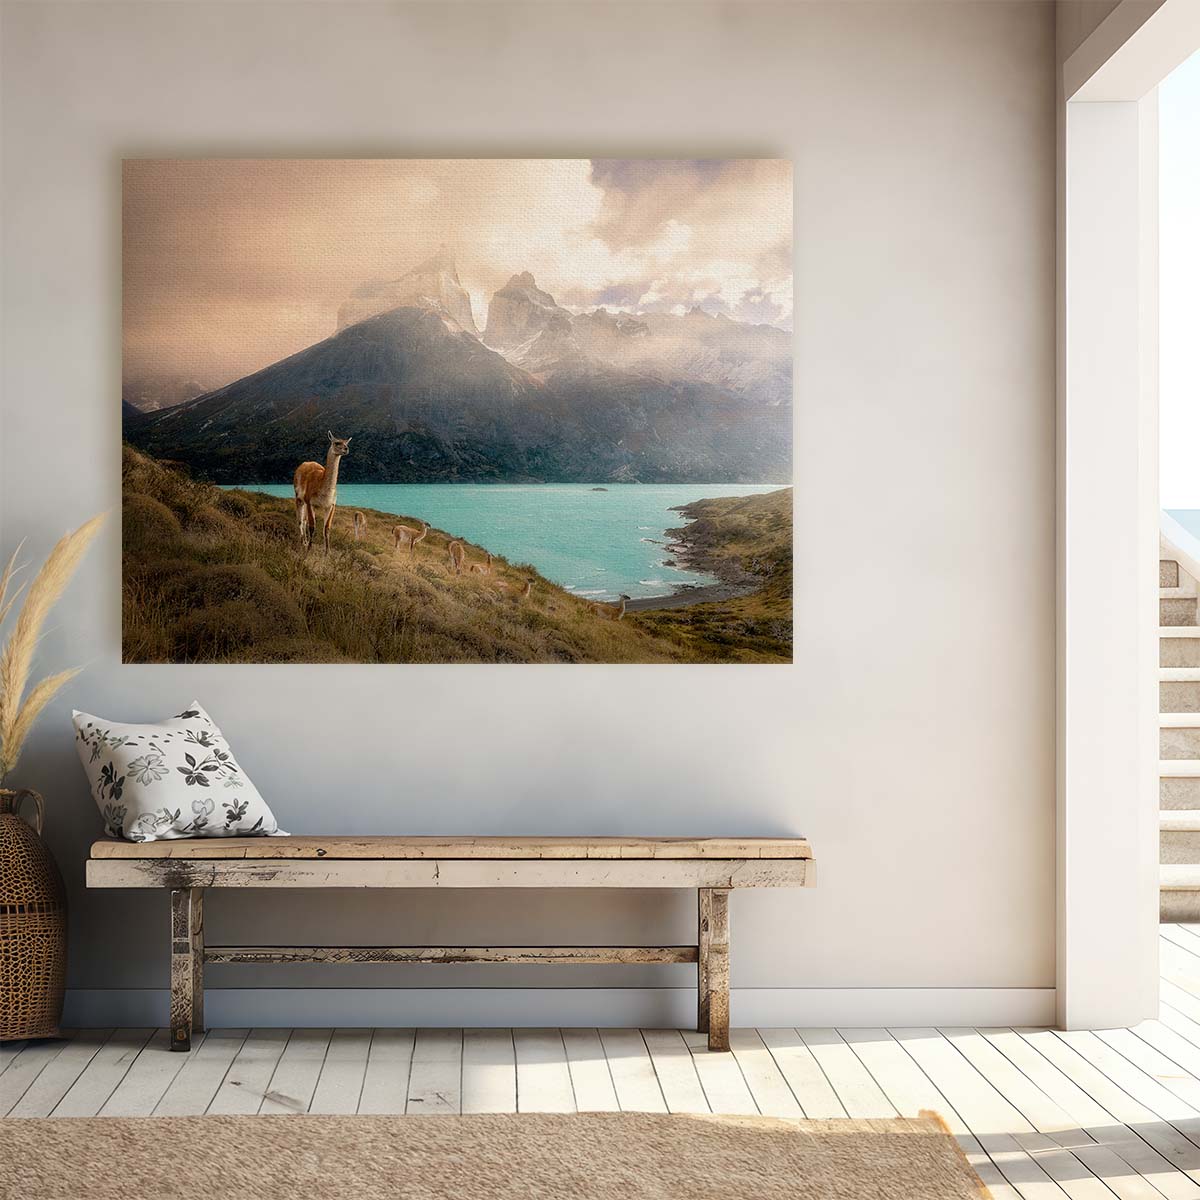 Torres del Paine Alpaca & Mountain Lake Wall Art by Luxuriance Designs. Made in USA.